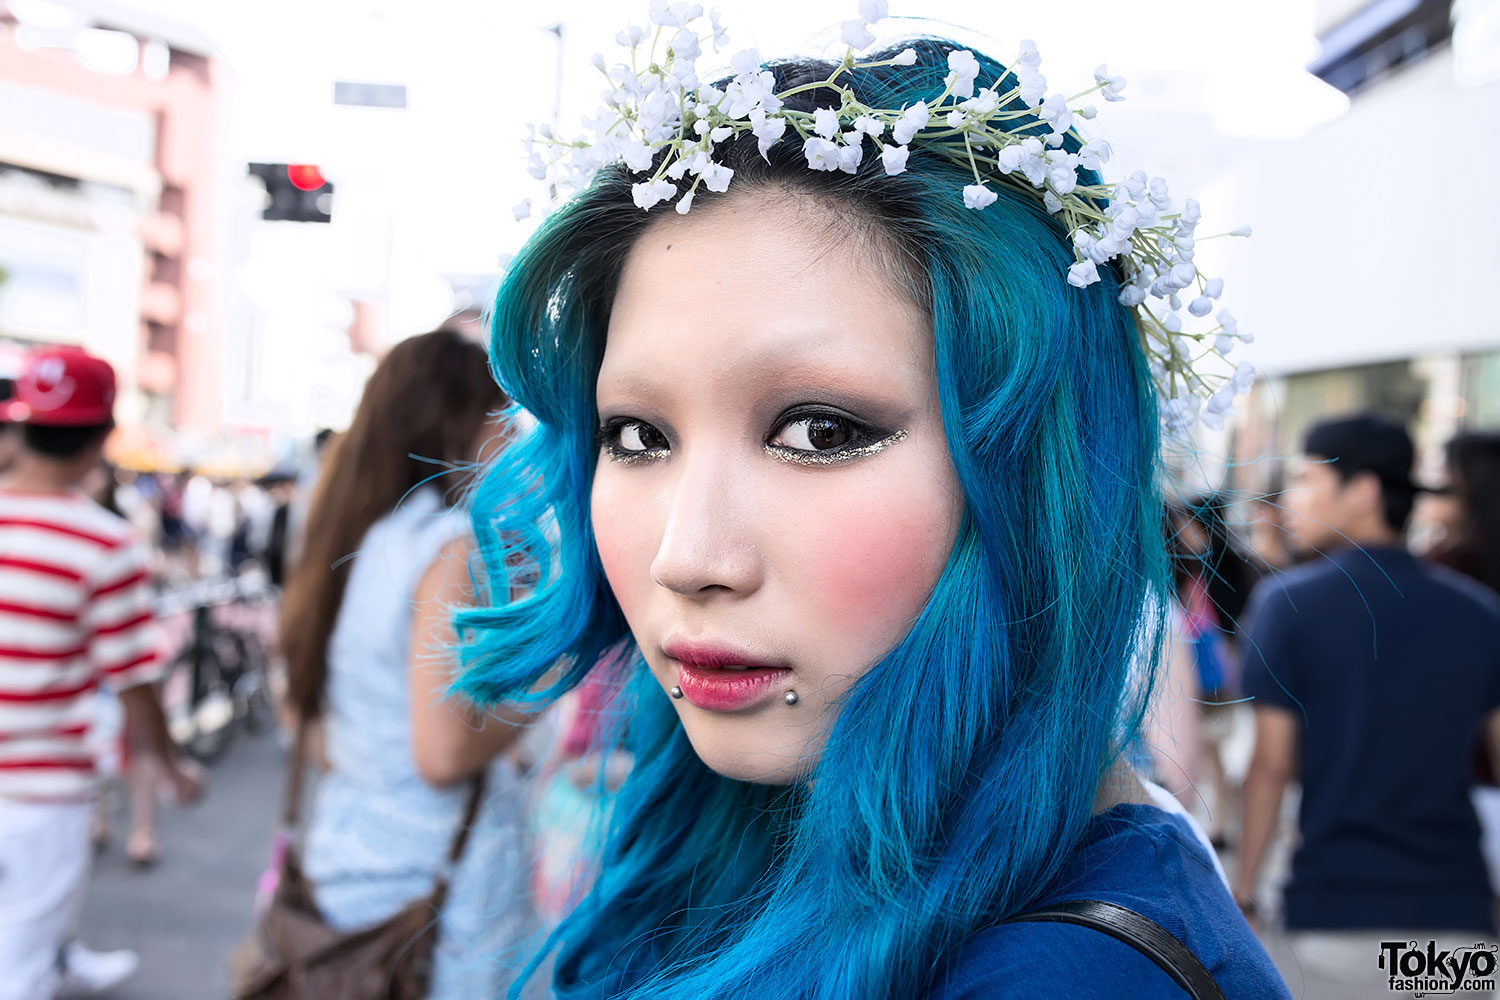 Blue hair and flower crown: the perfect boho-chic look - wide 7